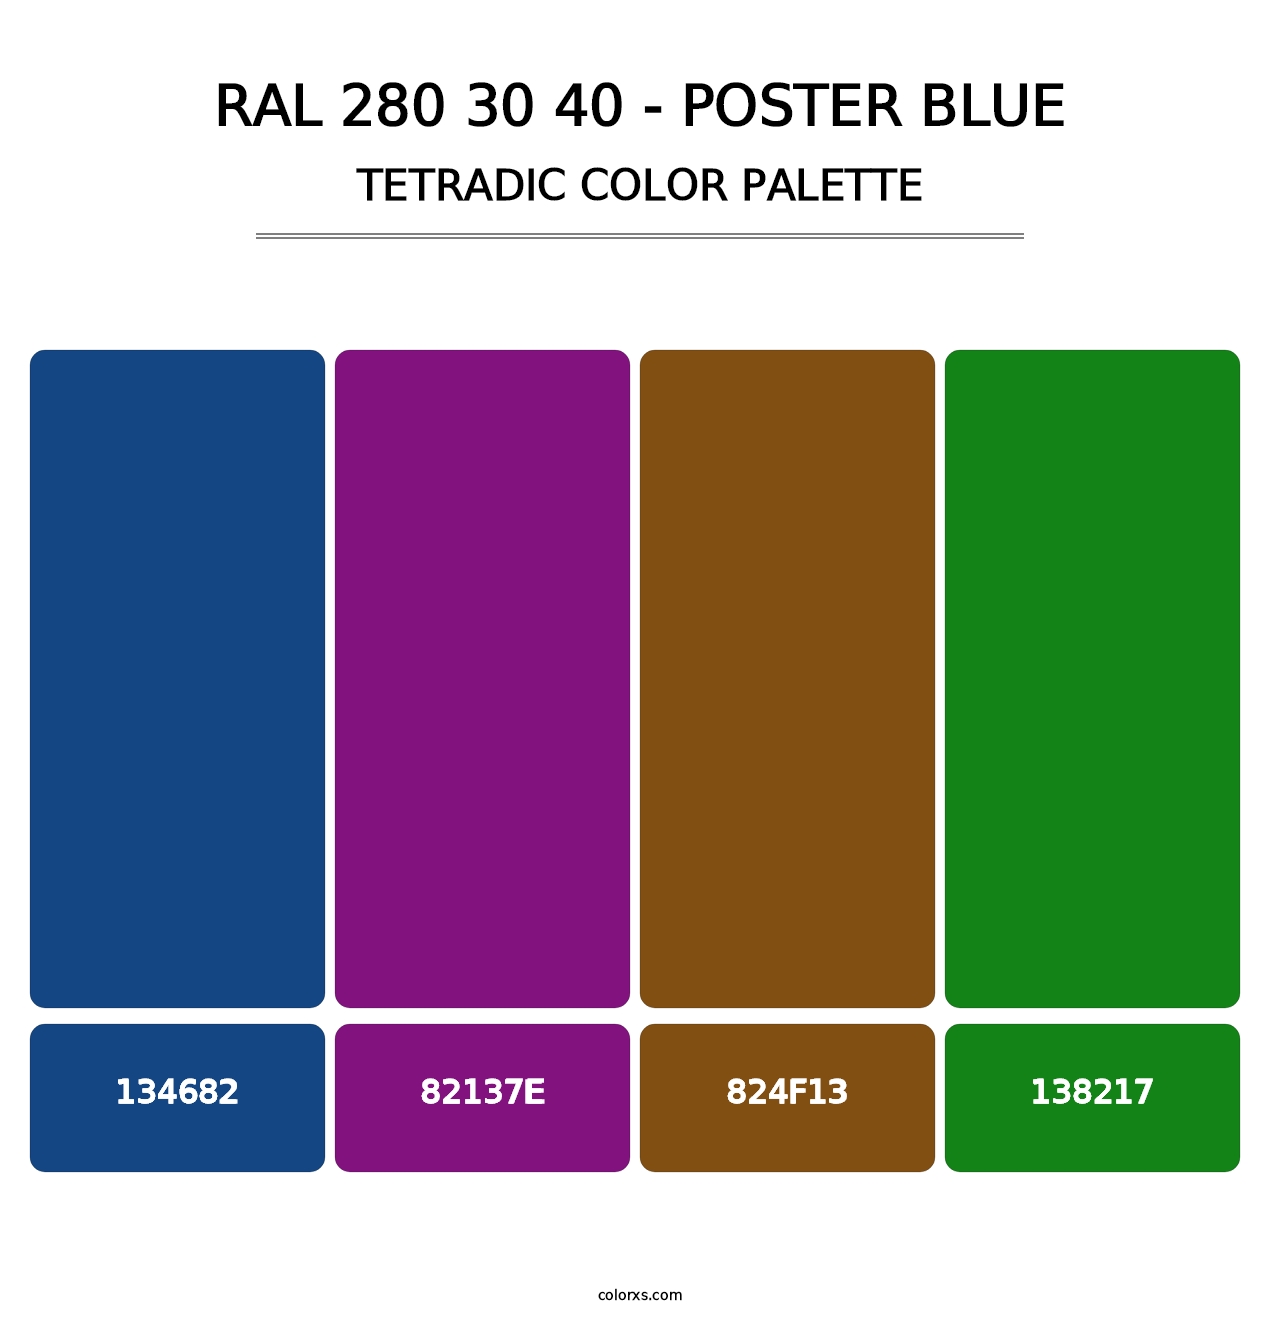 RAL 280 30 40 - Poster Blue - Tetradic Color Palette